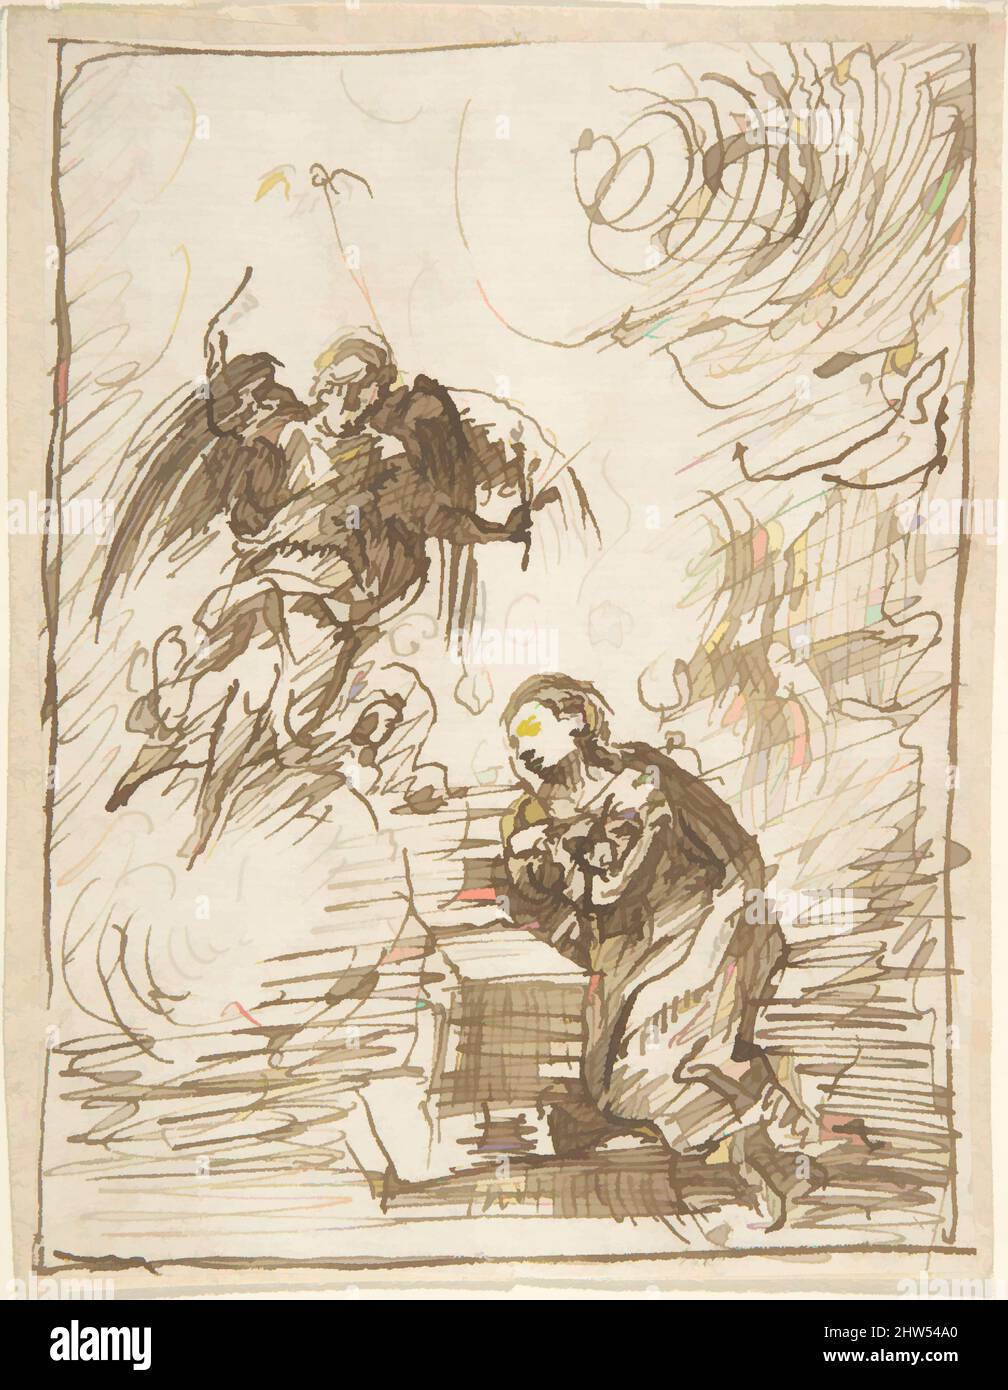 Art inspired by The Annunciation, 17th century, Pen and dark brown ink. Composition outlined in same, by the artist. On ivory paper, 4-5/8 x 3-1/2 in. (11.7 x 8.9 cm), Drawings, Anonymous, Spanish, School of Seville, 17th century, Classic works modernized by Artotop with a splash of modernity. Shapes, color and value, eye-catching visual impact on art. Emotions through freedom of artworks in a contemporary way. A timeless message pursuing a wildly creative new direction. Artists turning to the digital medium and creating the Artotop NFT Stock Photo